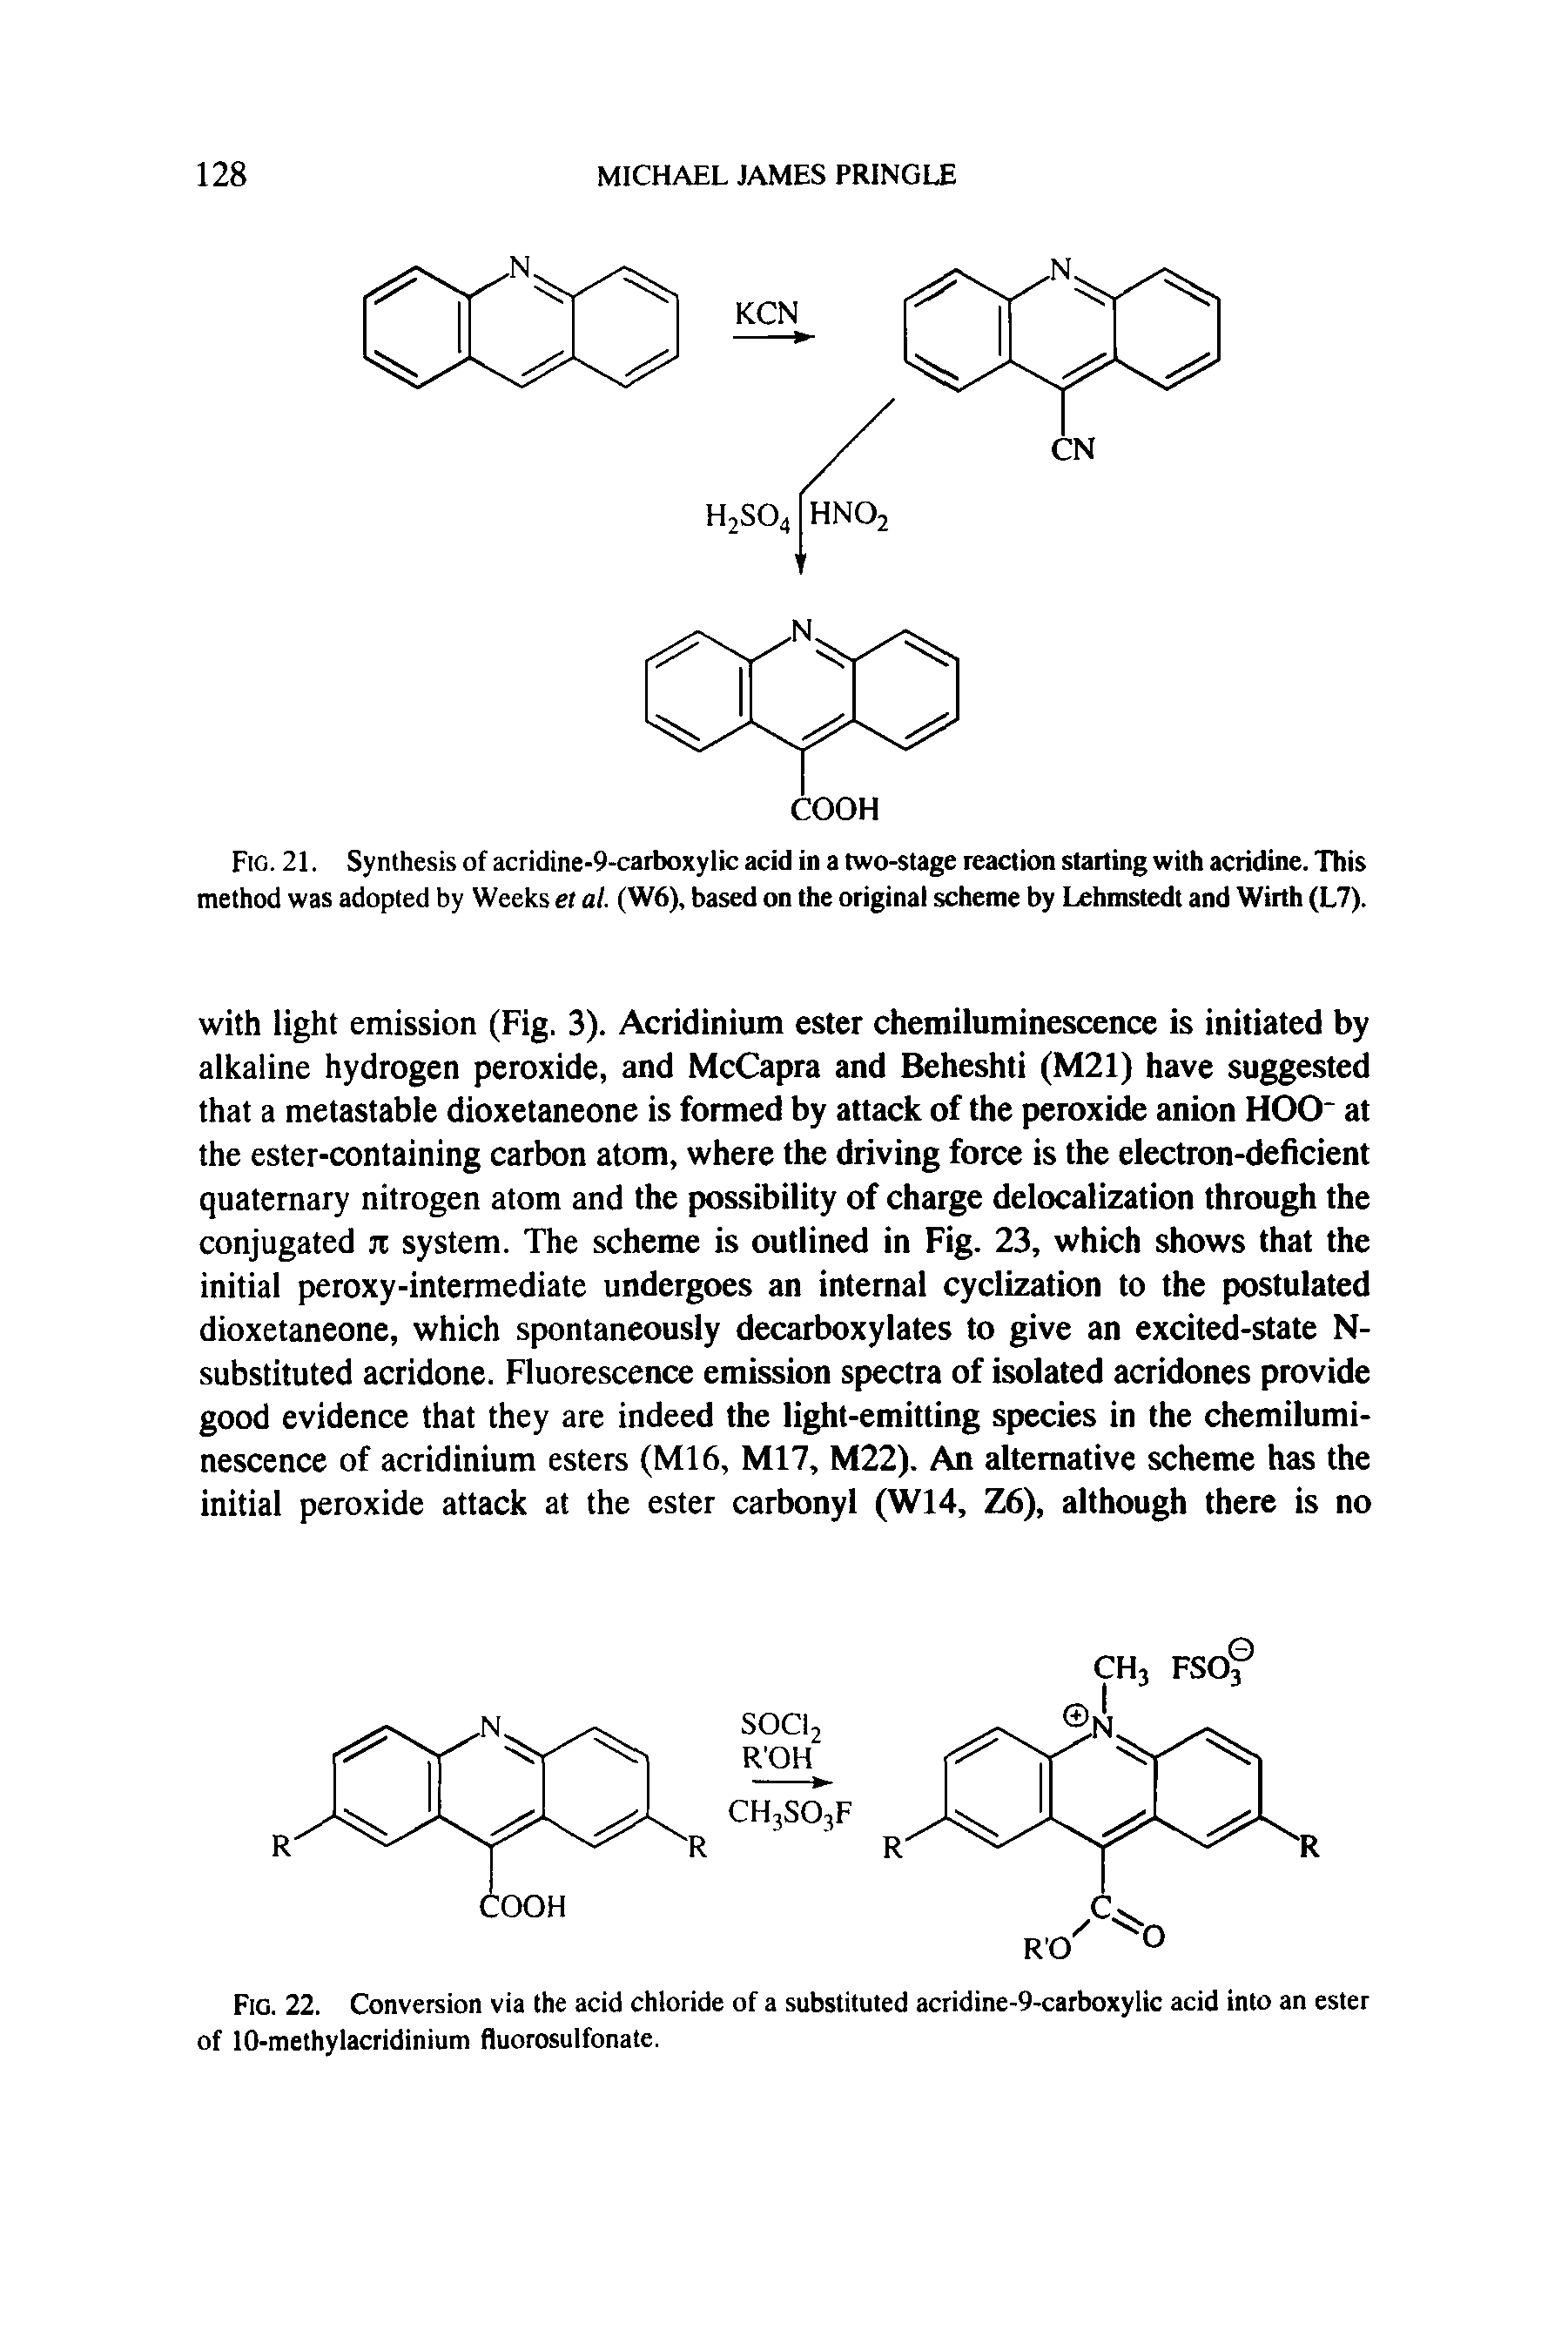 Fig. 22. Conversion via the acid chloride of a substituted acridine-9-carboxylic acid into an ester...